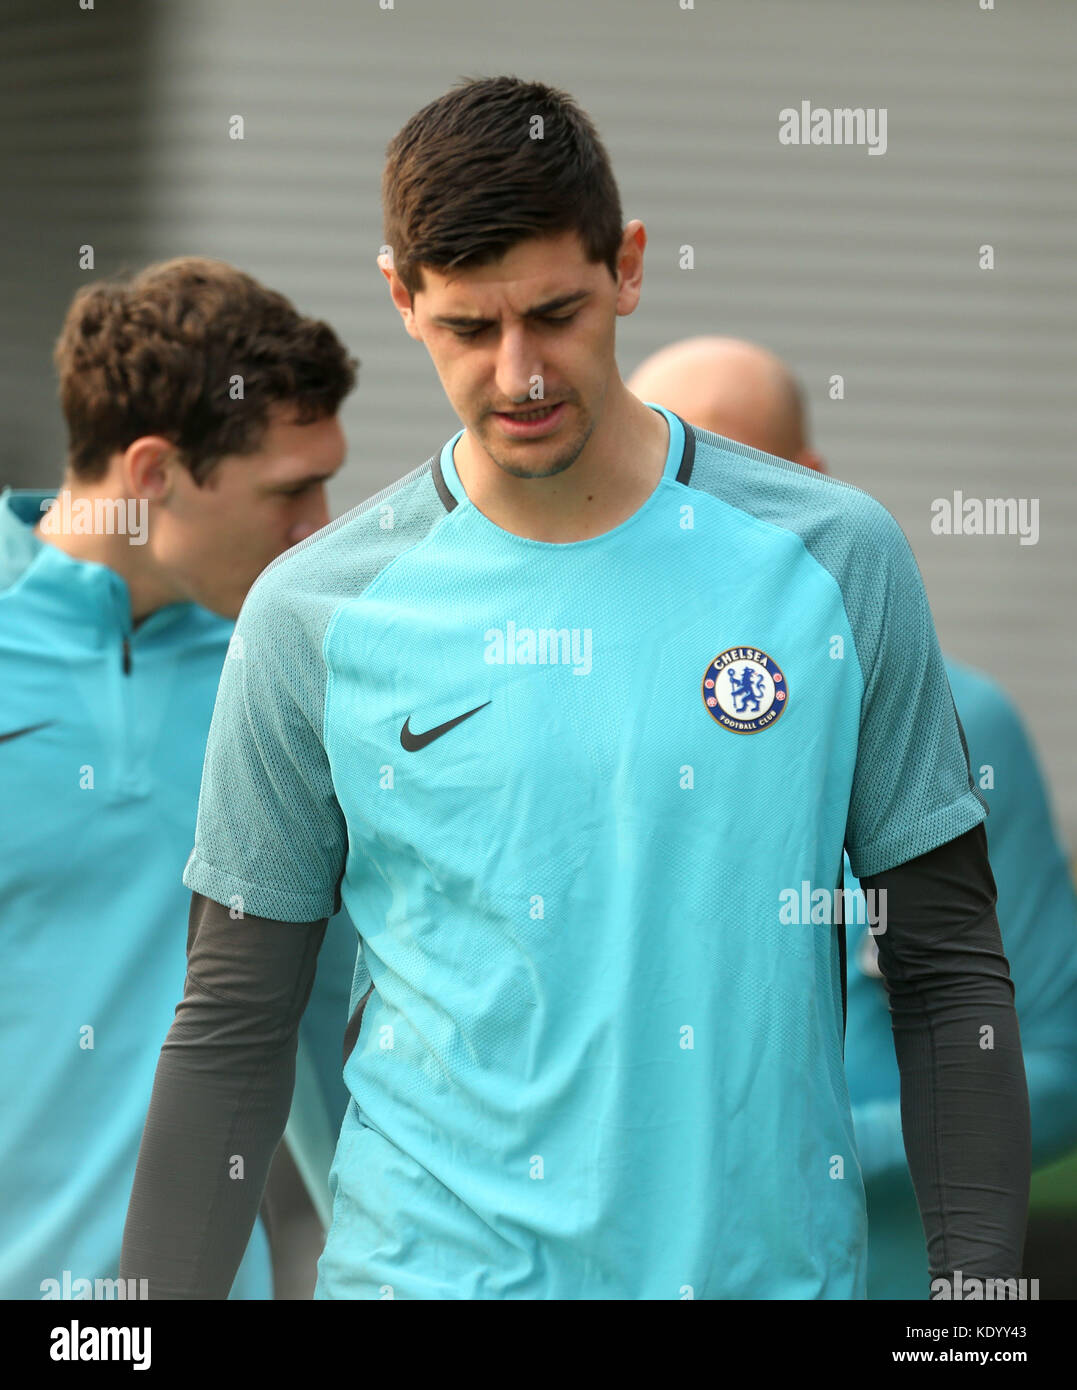 Chelsea goalkeeper Thibaut Courtois during a training session at Chelsea FC Training Ground, Stoke D'Abernon. Stock Photo